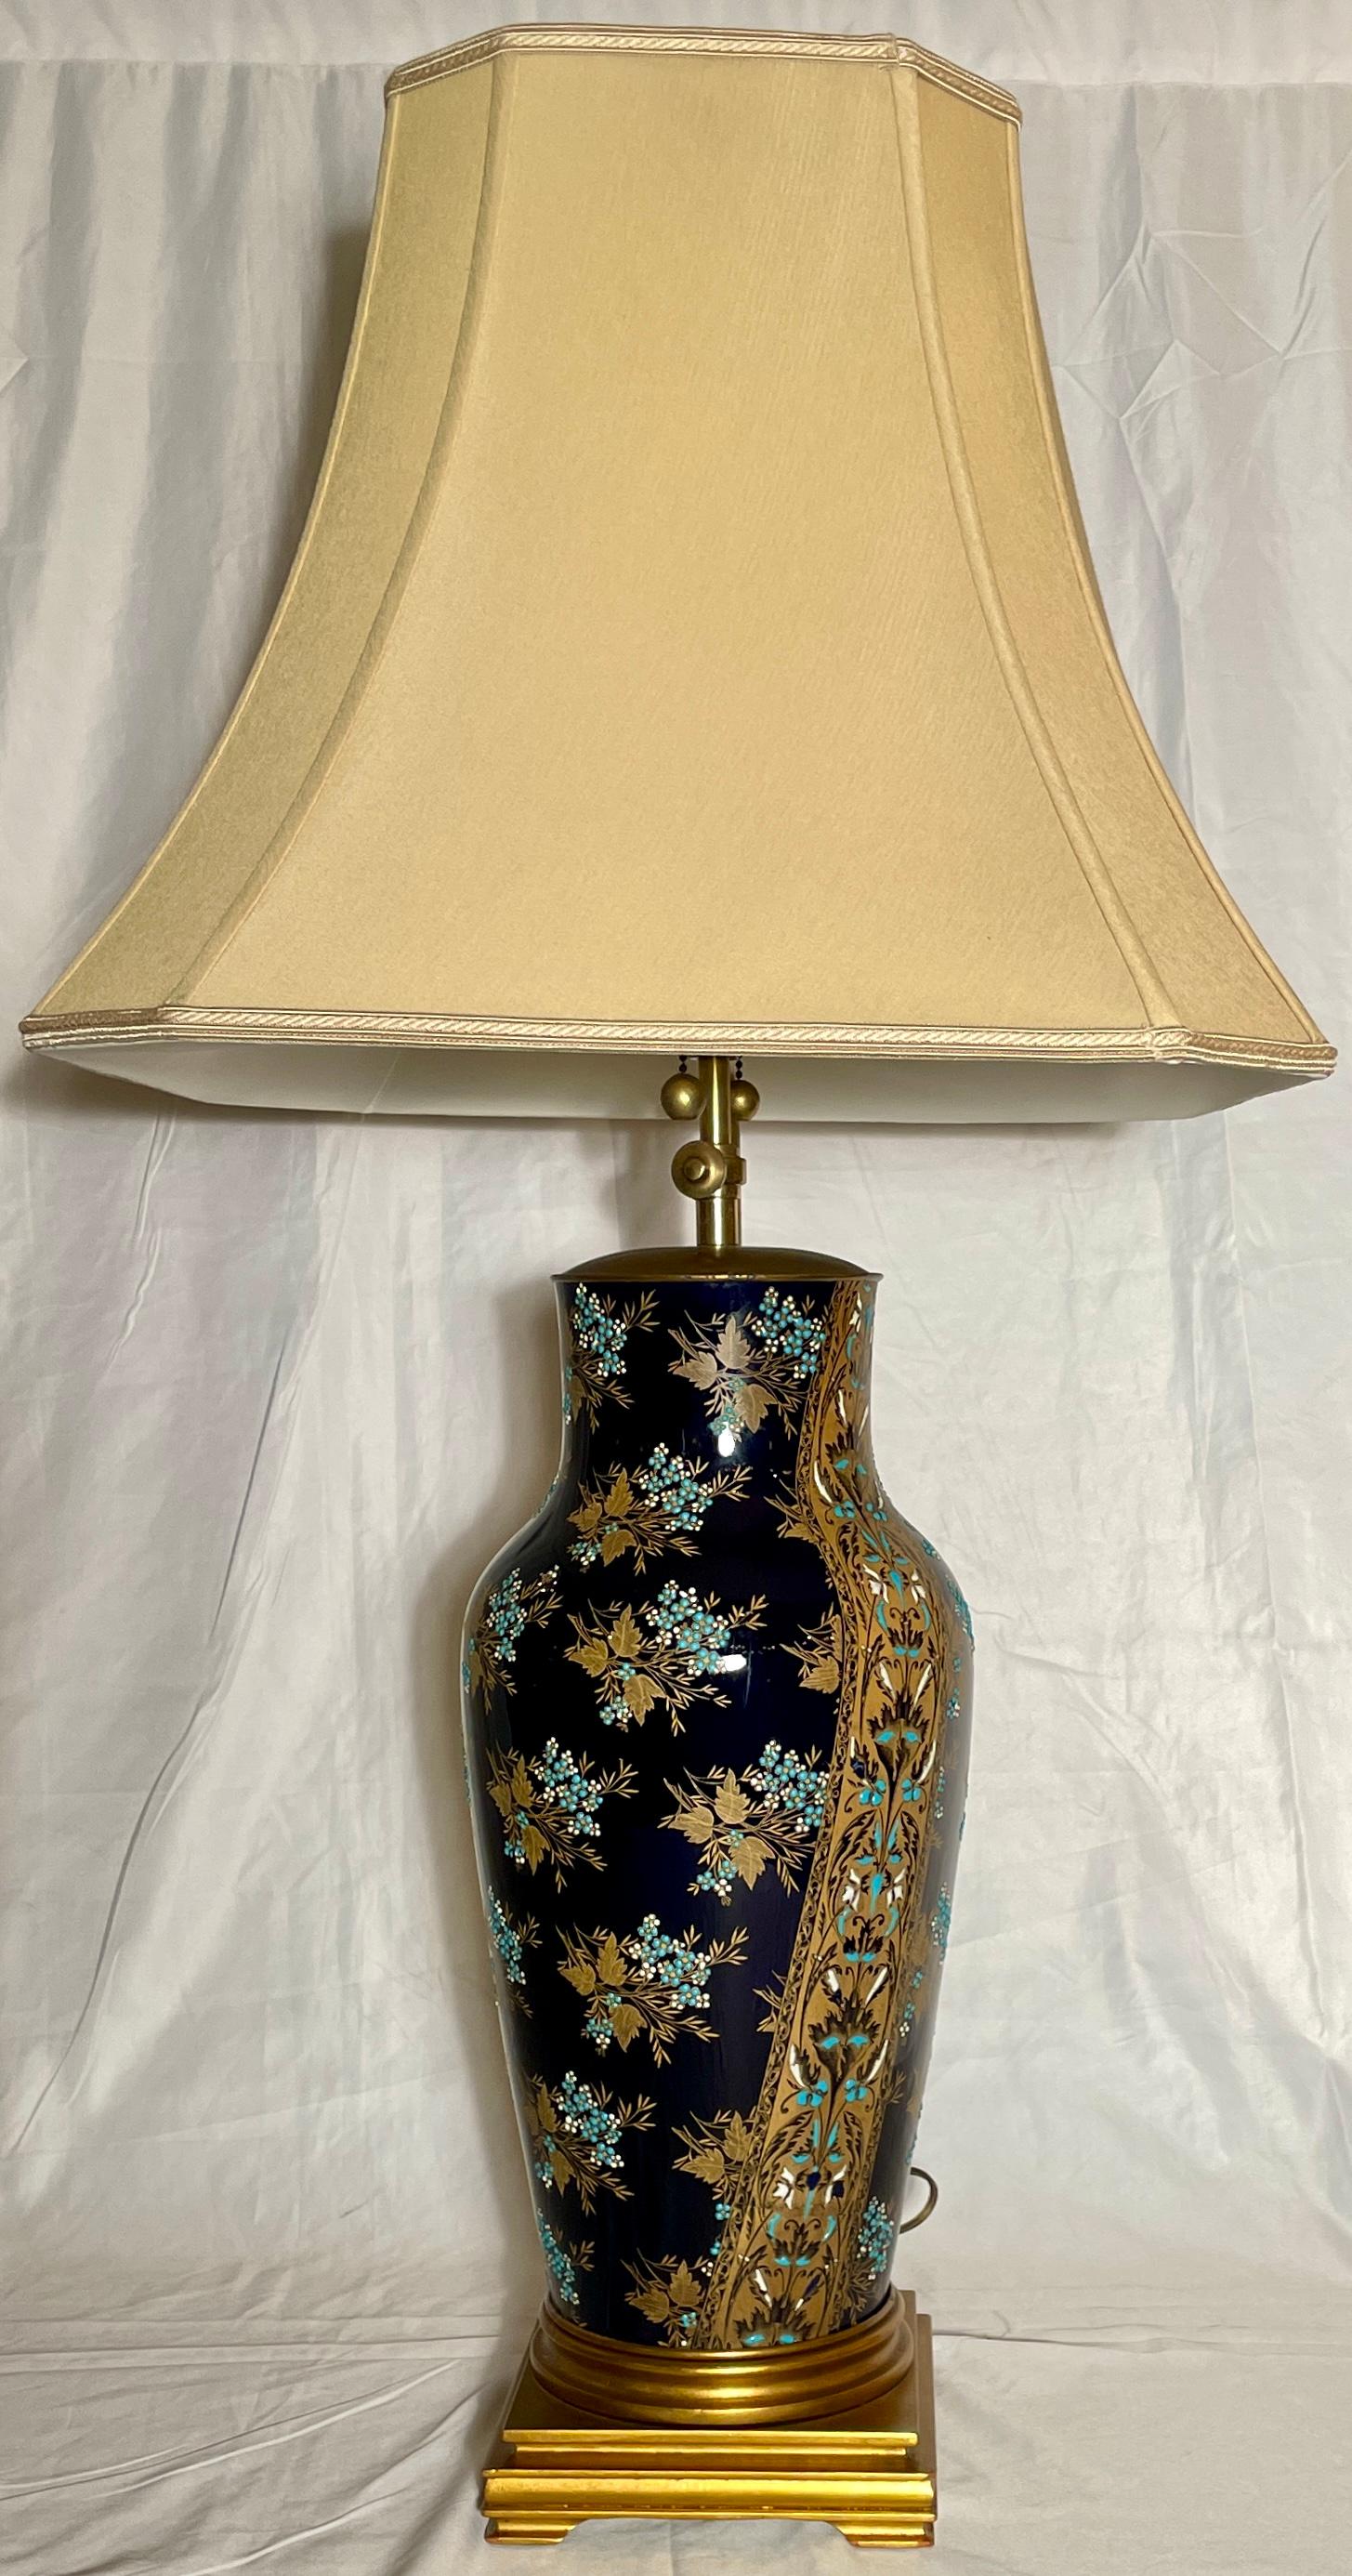 Pair Antique French Chinoiserie Cobalt Blue Enameled Porcelain lamps, Circa 1910-1920.